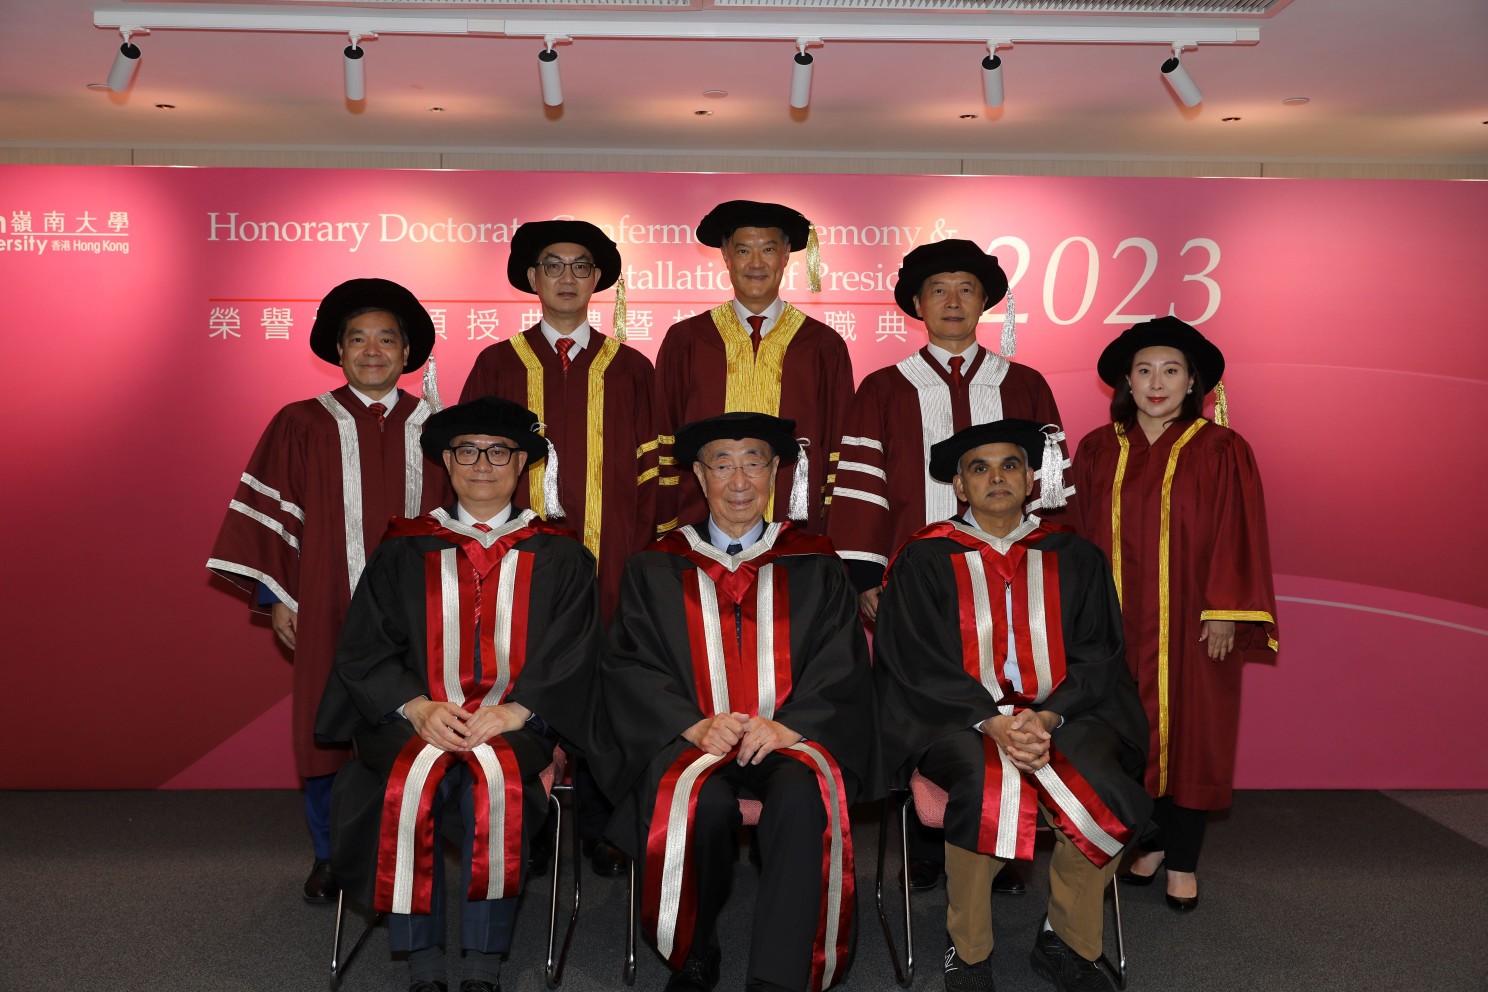 Lingnan University hosts Honorary Doctorate Conferment Ceremony 2023 and Installation of President.